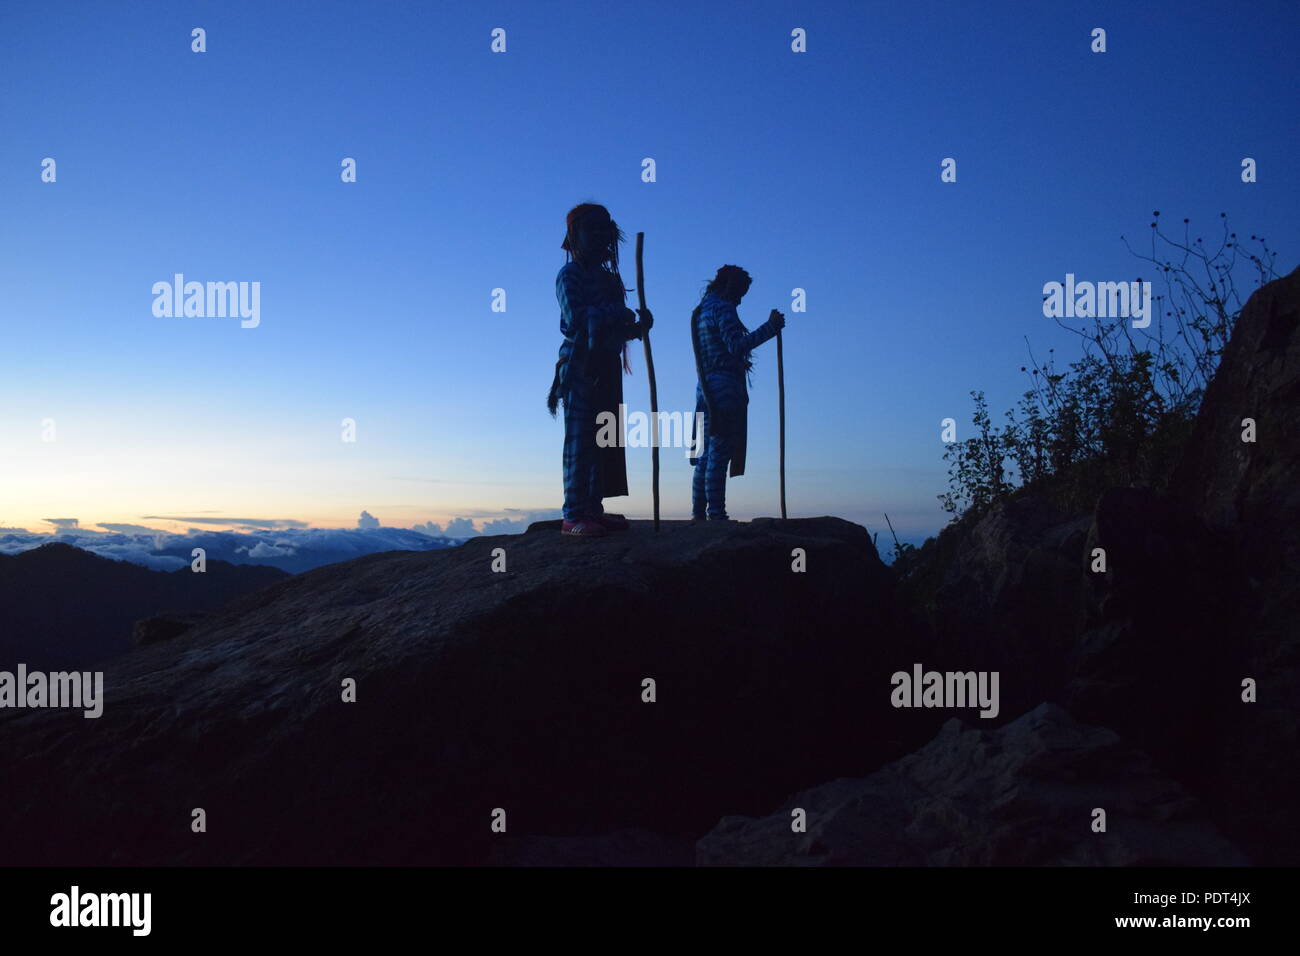 Silhouette Timeline of 2 young girls at the morning dusk standing on top of the Ampucao Sta. Fe ridges awaiting the Sunrise at Mount Ulap in Itogon, Stock Photo